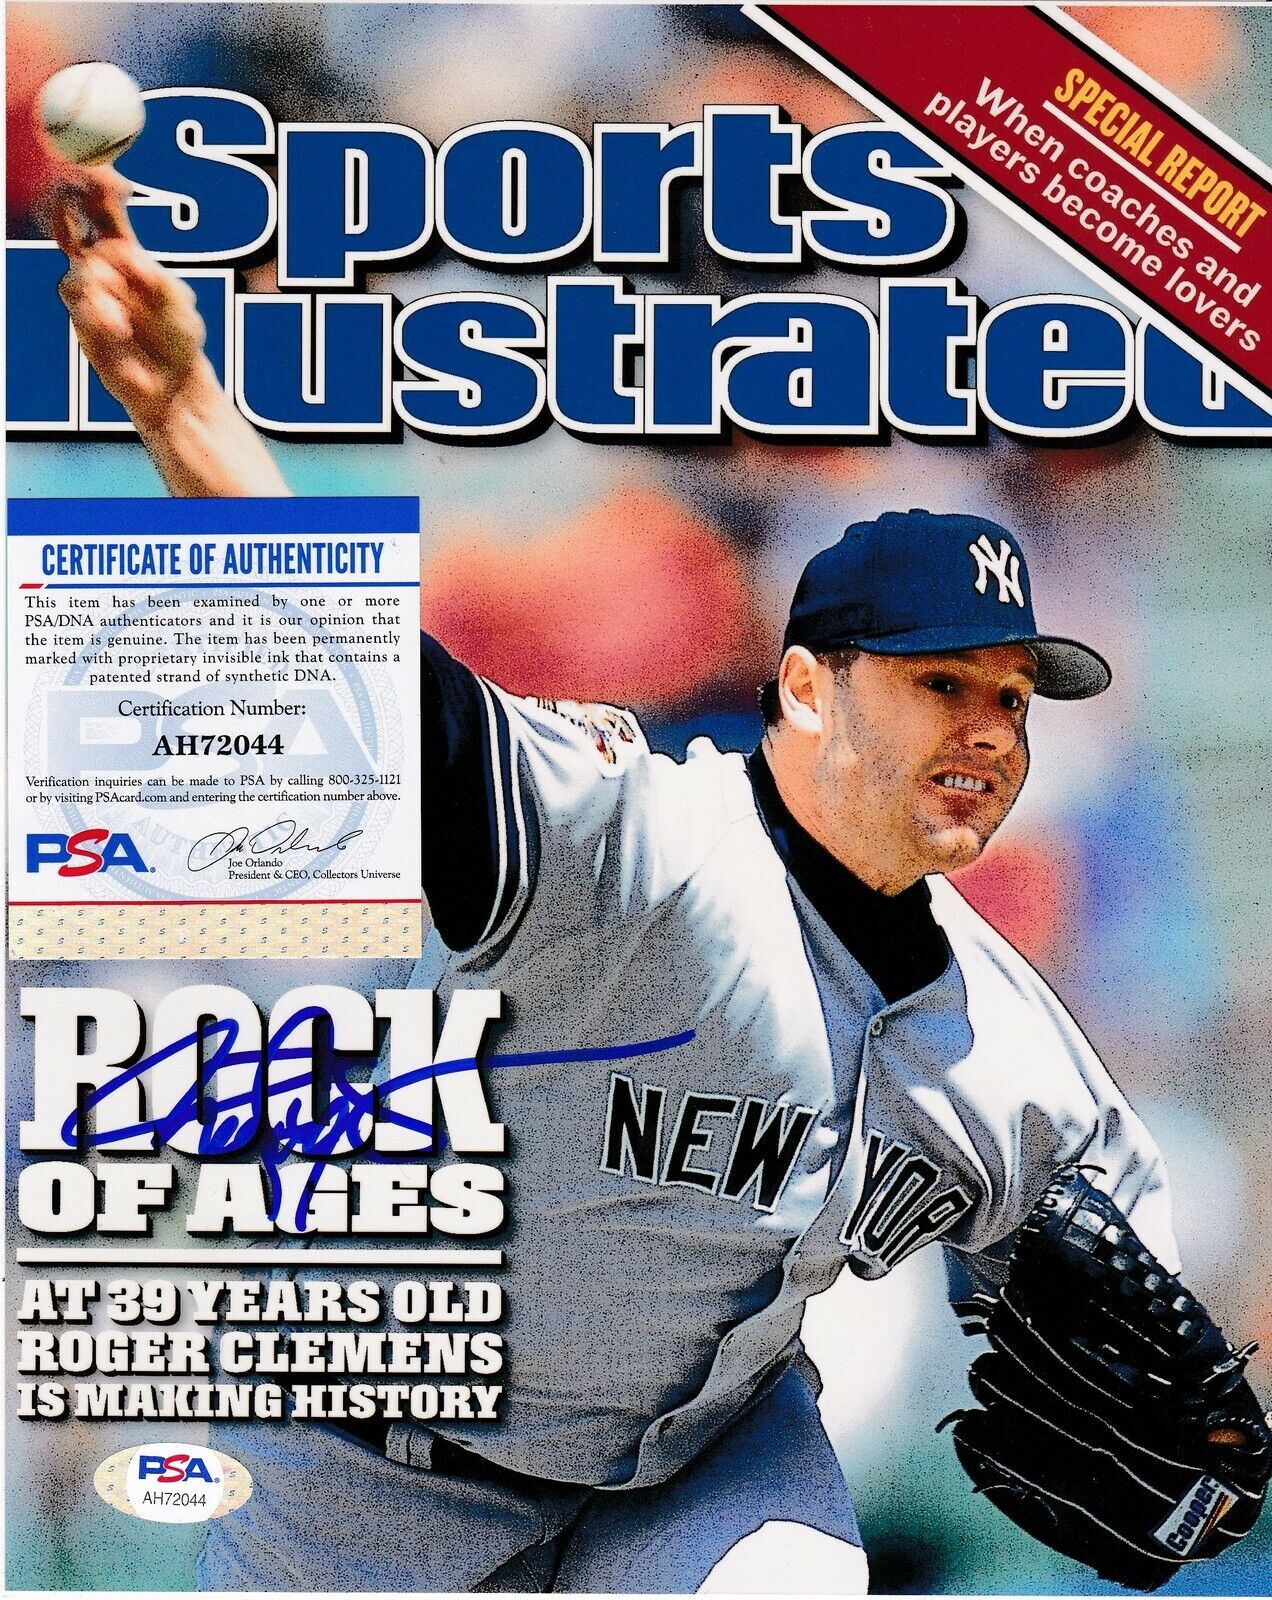 ROGER CLEMENS NEW YORK YANKEES PSA/DNA SPORTS ILLUSTRATRATED COVER SIGNED 8x10